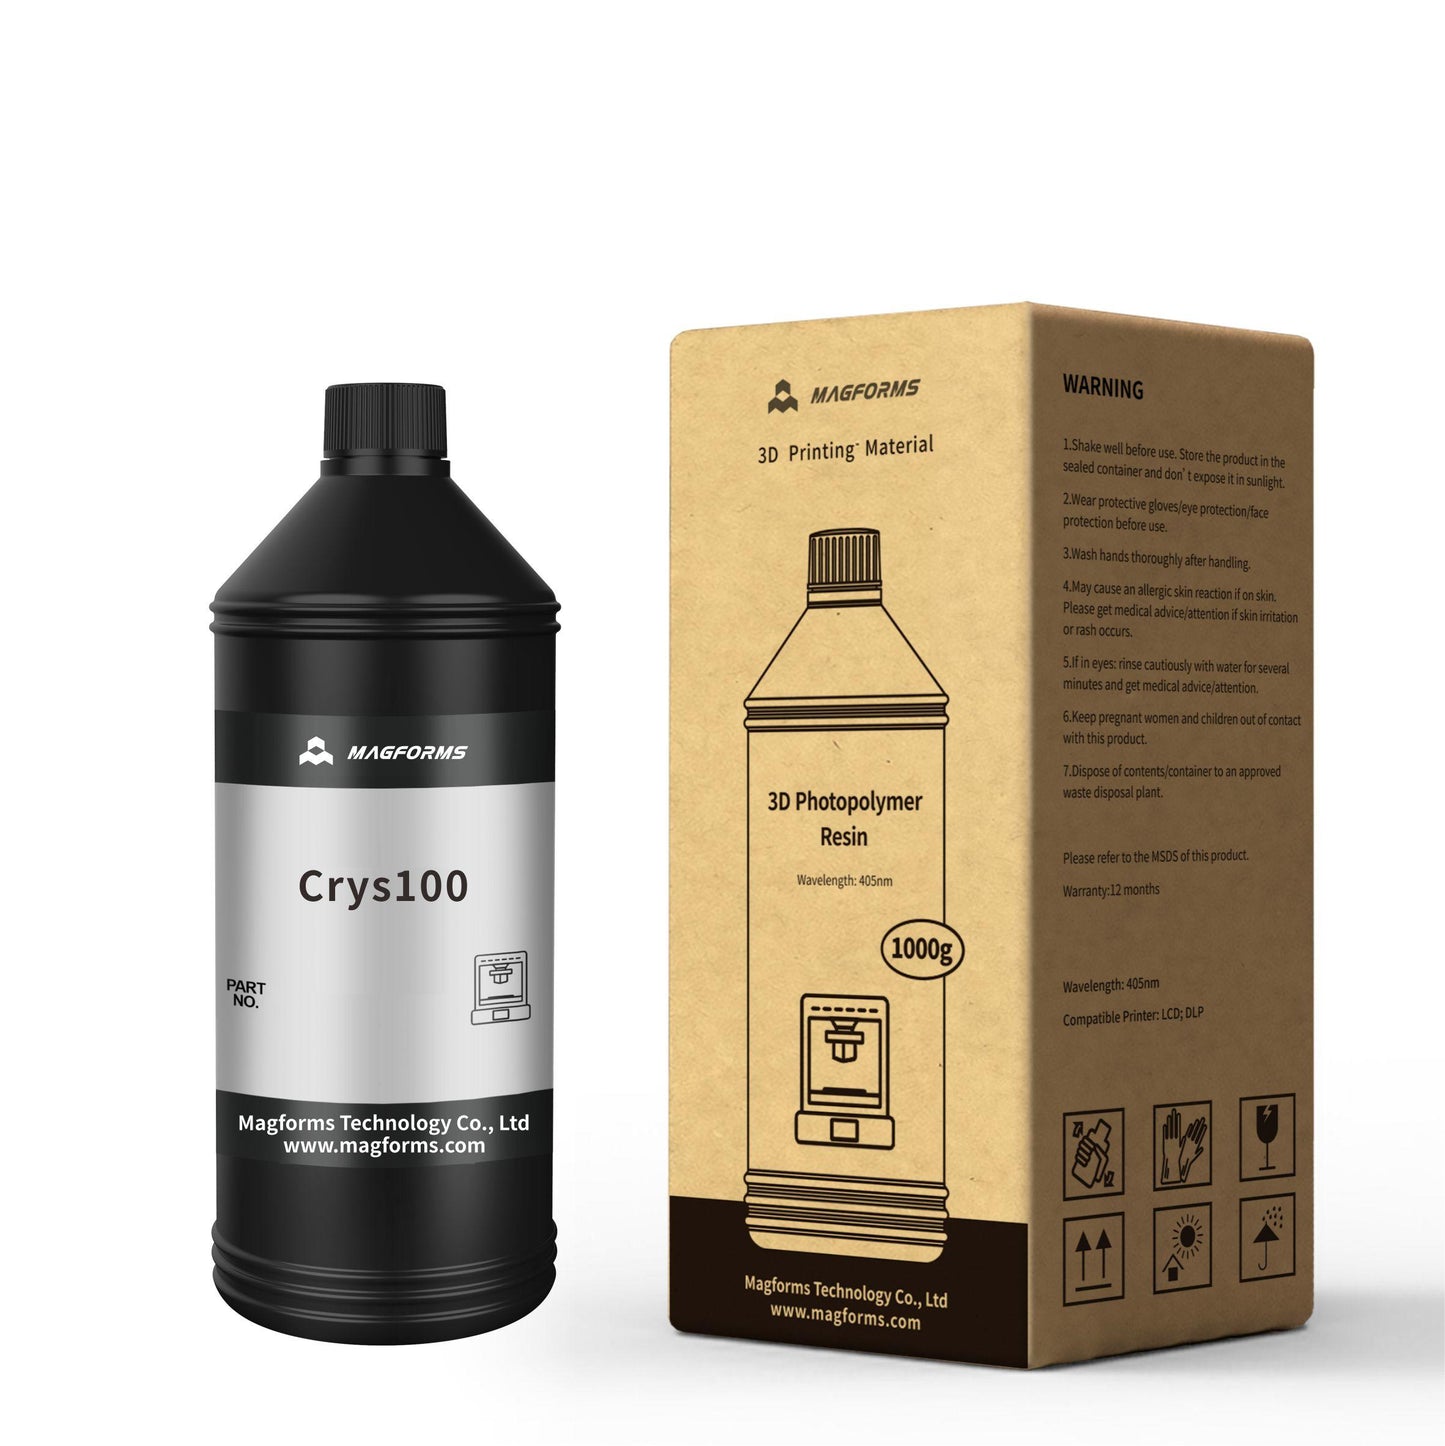 Magforms CRYS100 3D Photopolymer Resin Clear/Translucent 1kg - www.3dprintmonkey.co.uk - 1